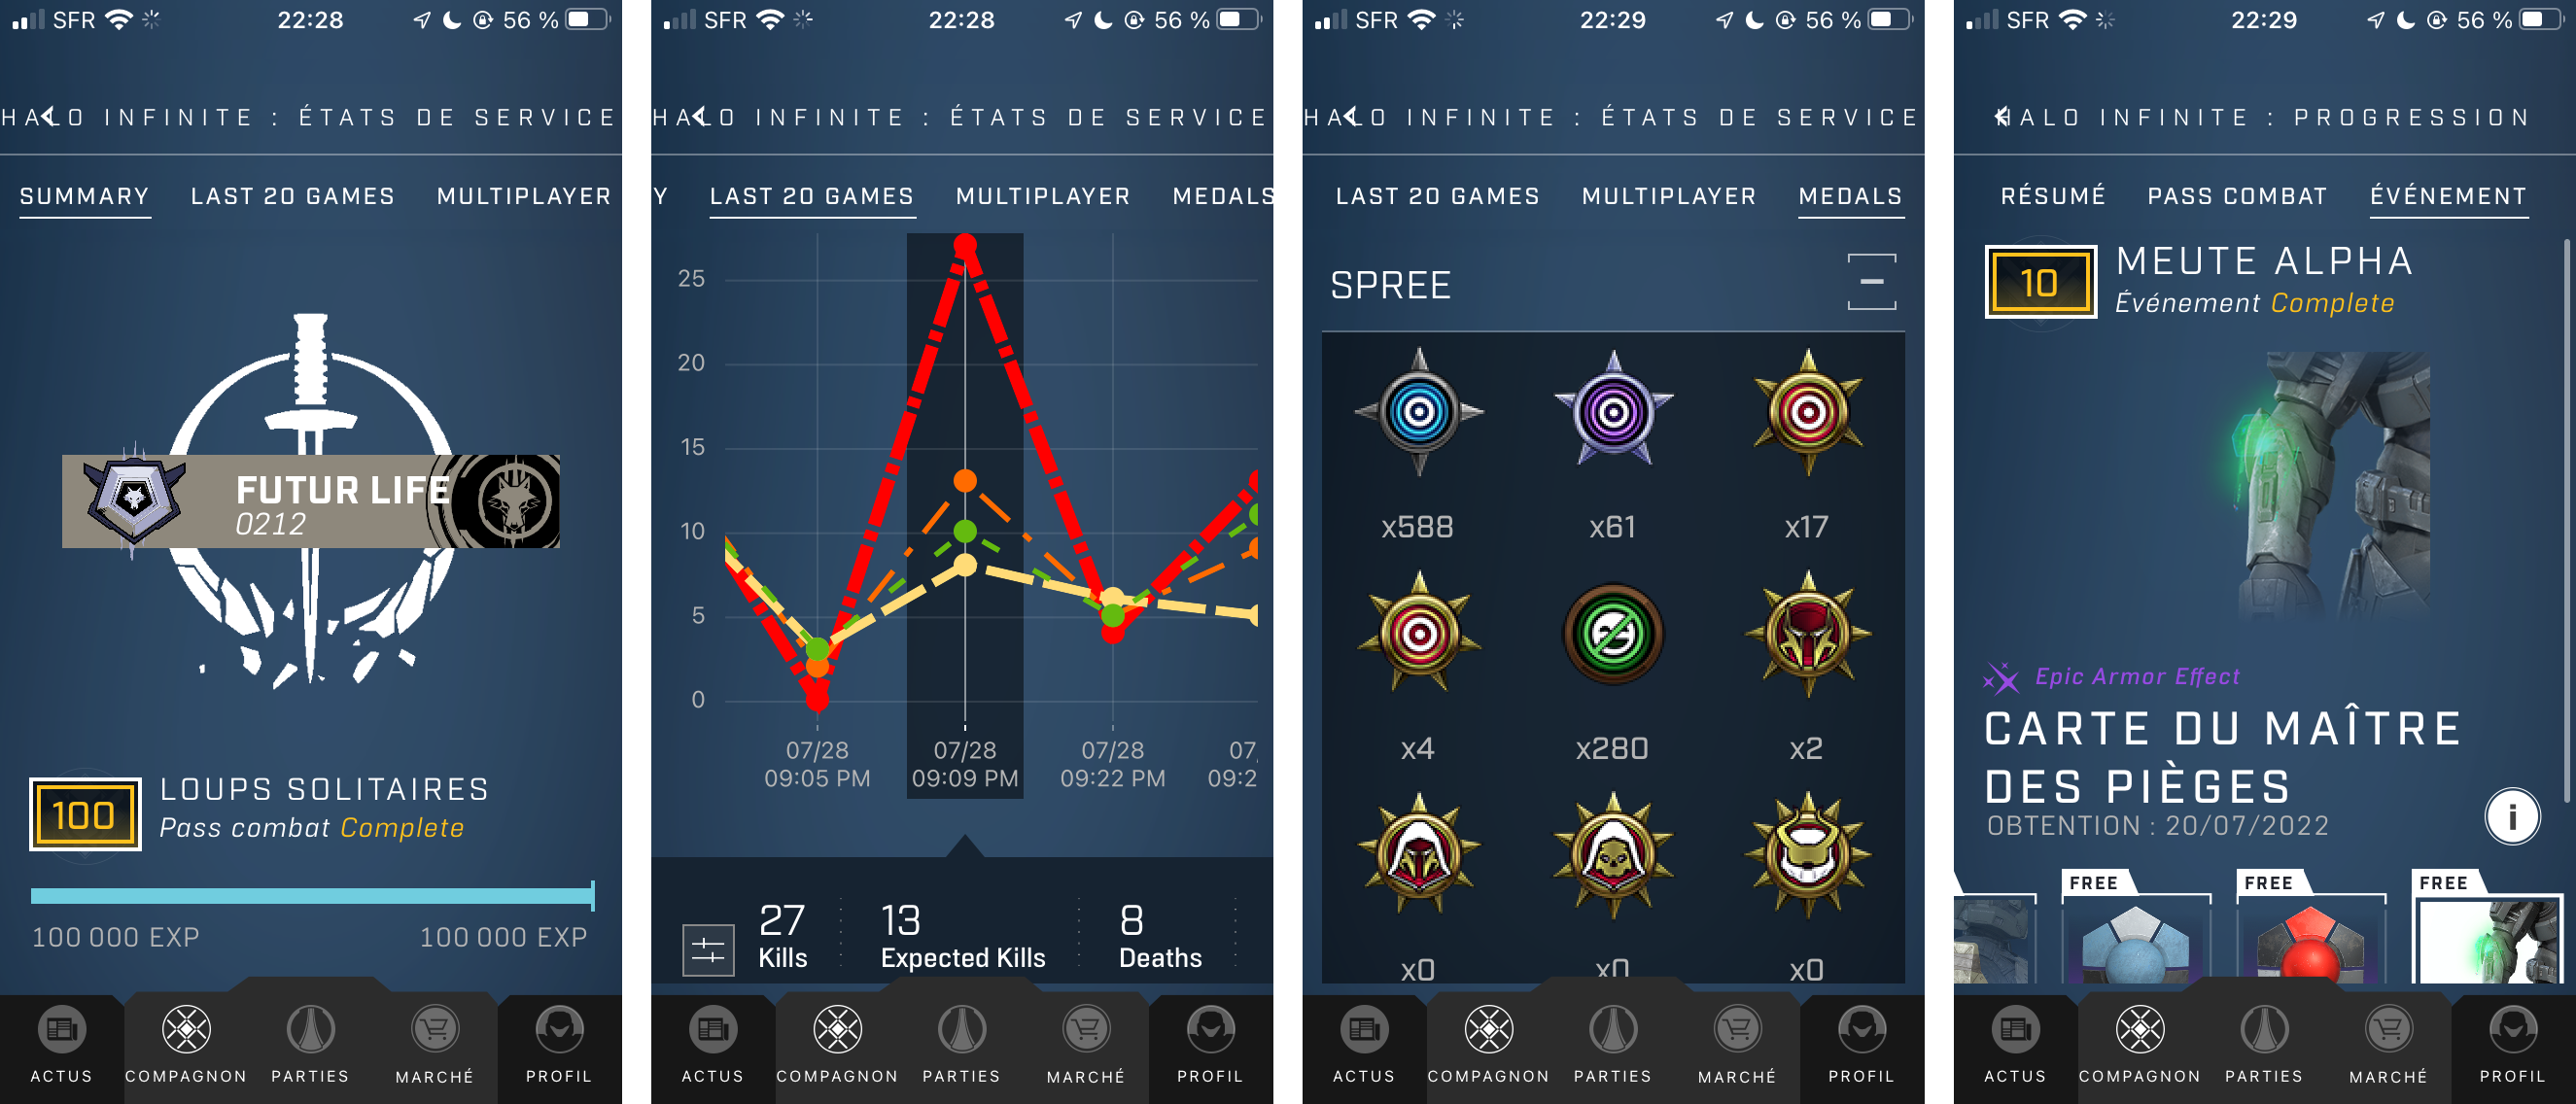 Halo Infinite Stats on Halo Waypoint Mobile Application